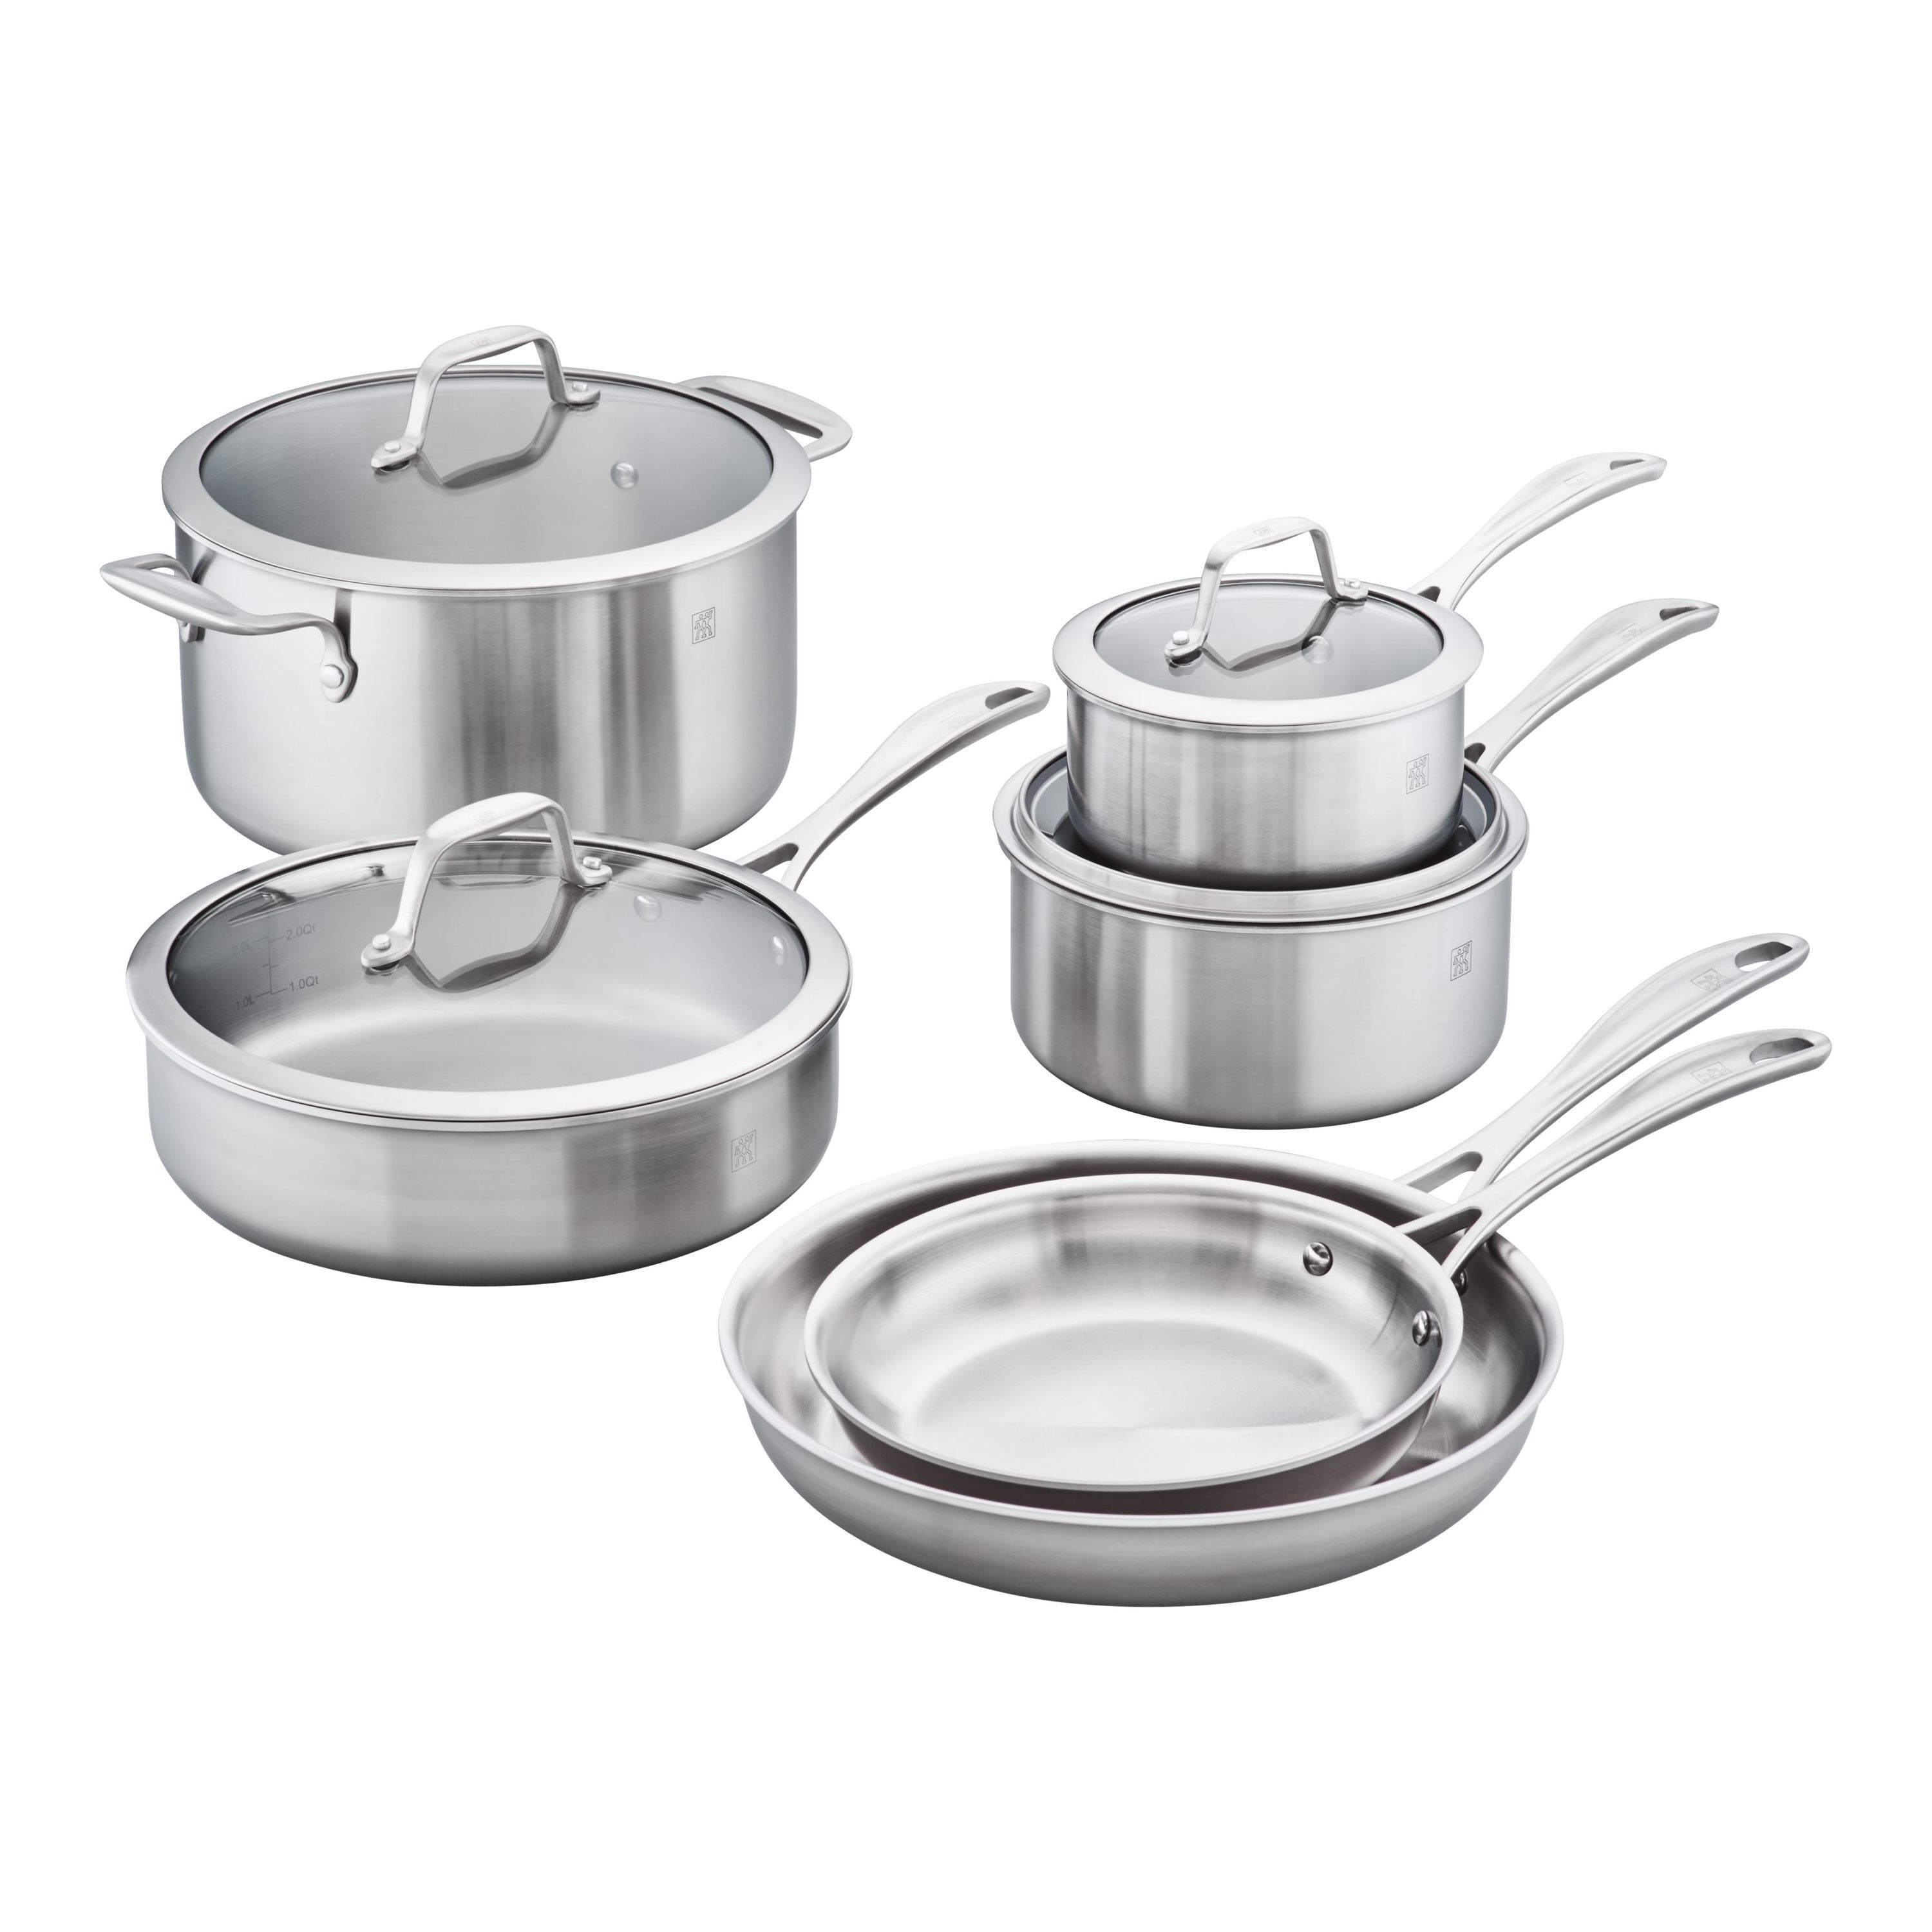 Royal Cuisine 3 Piece Stainless Steel Induction Stock Pot Set With Lids 